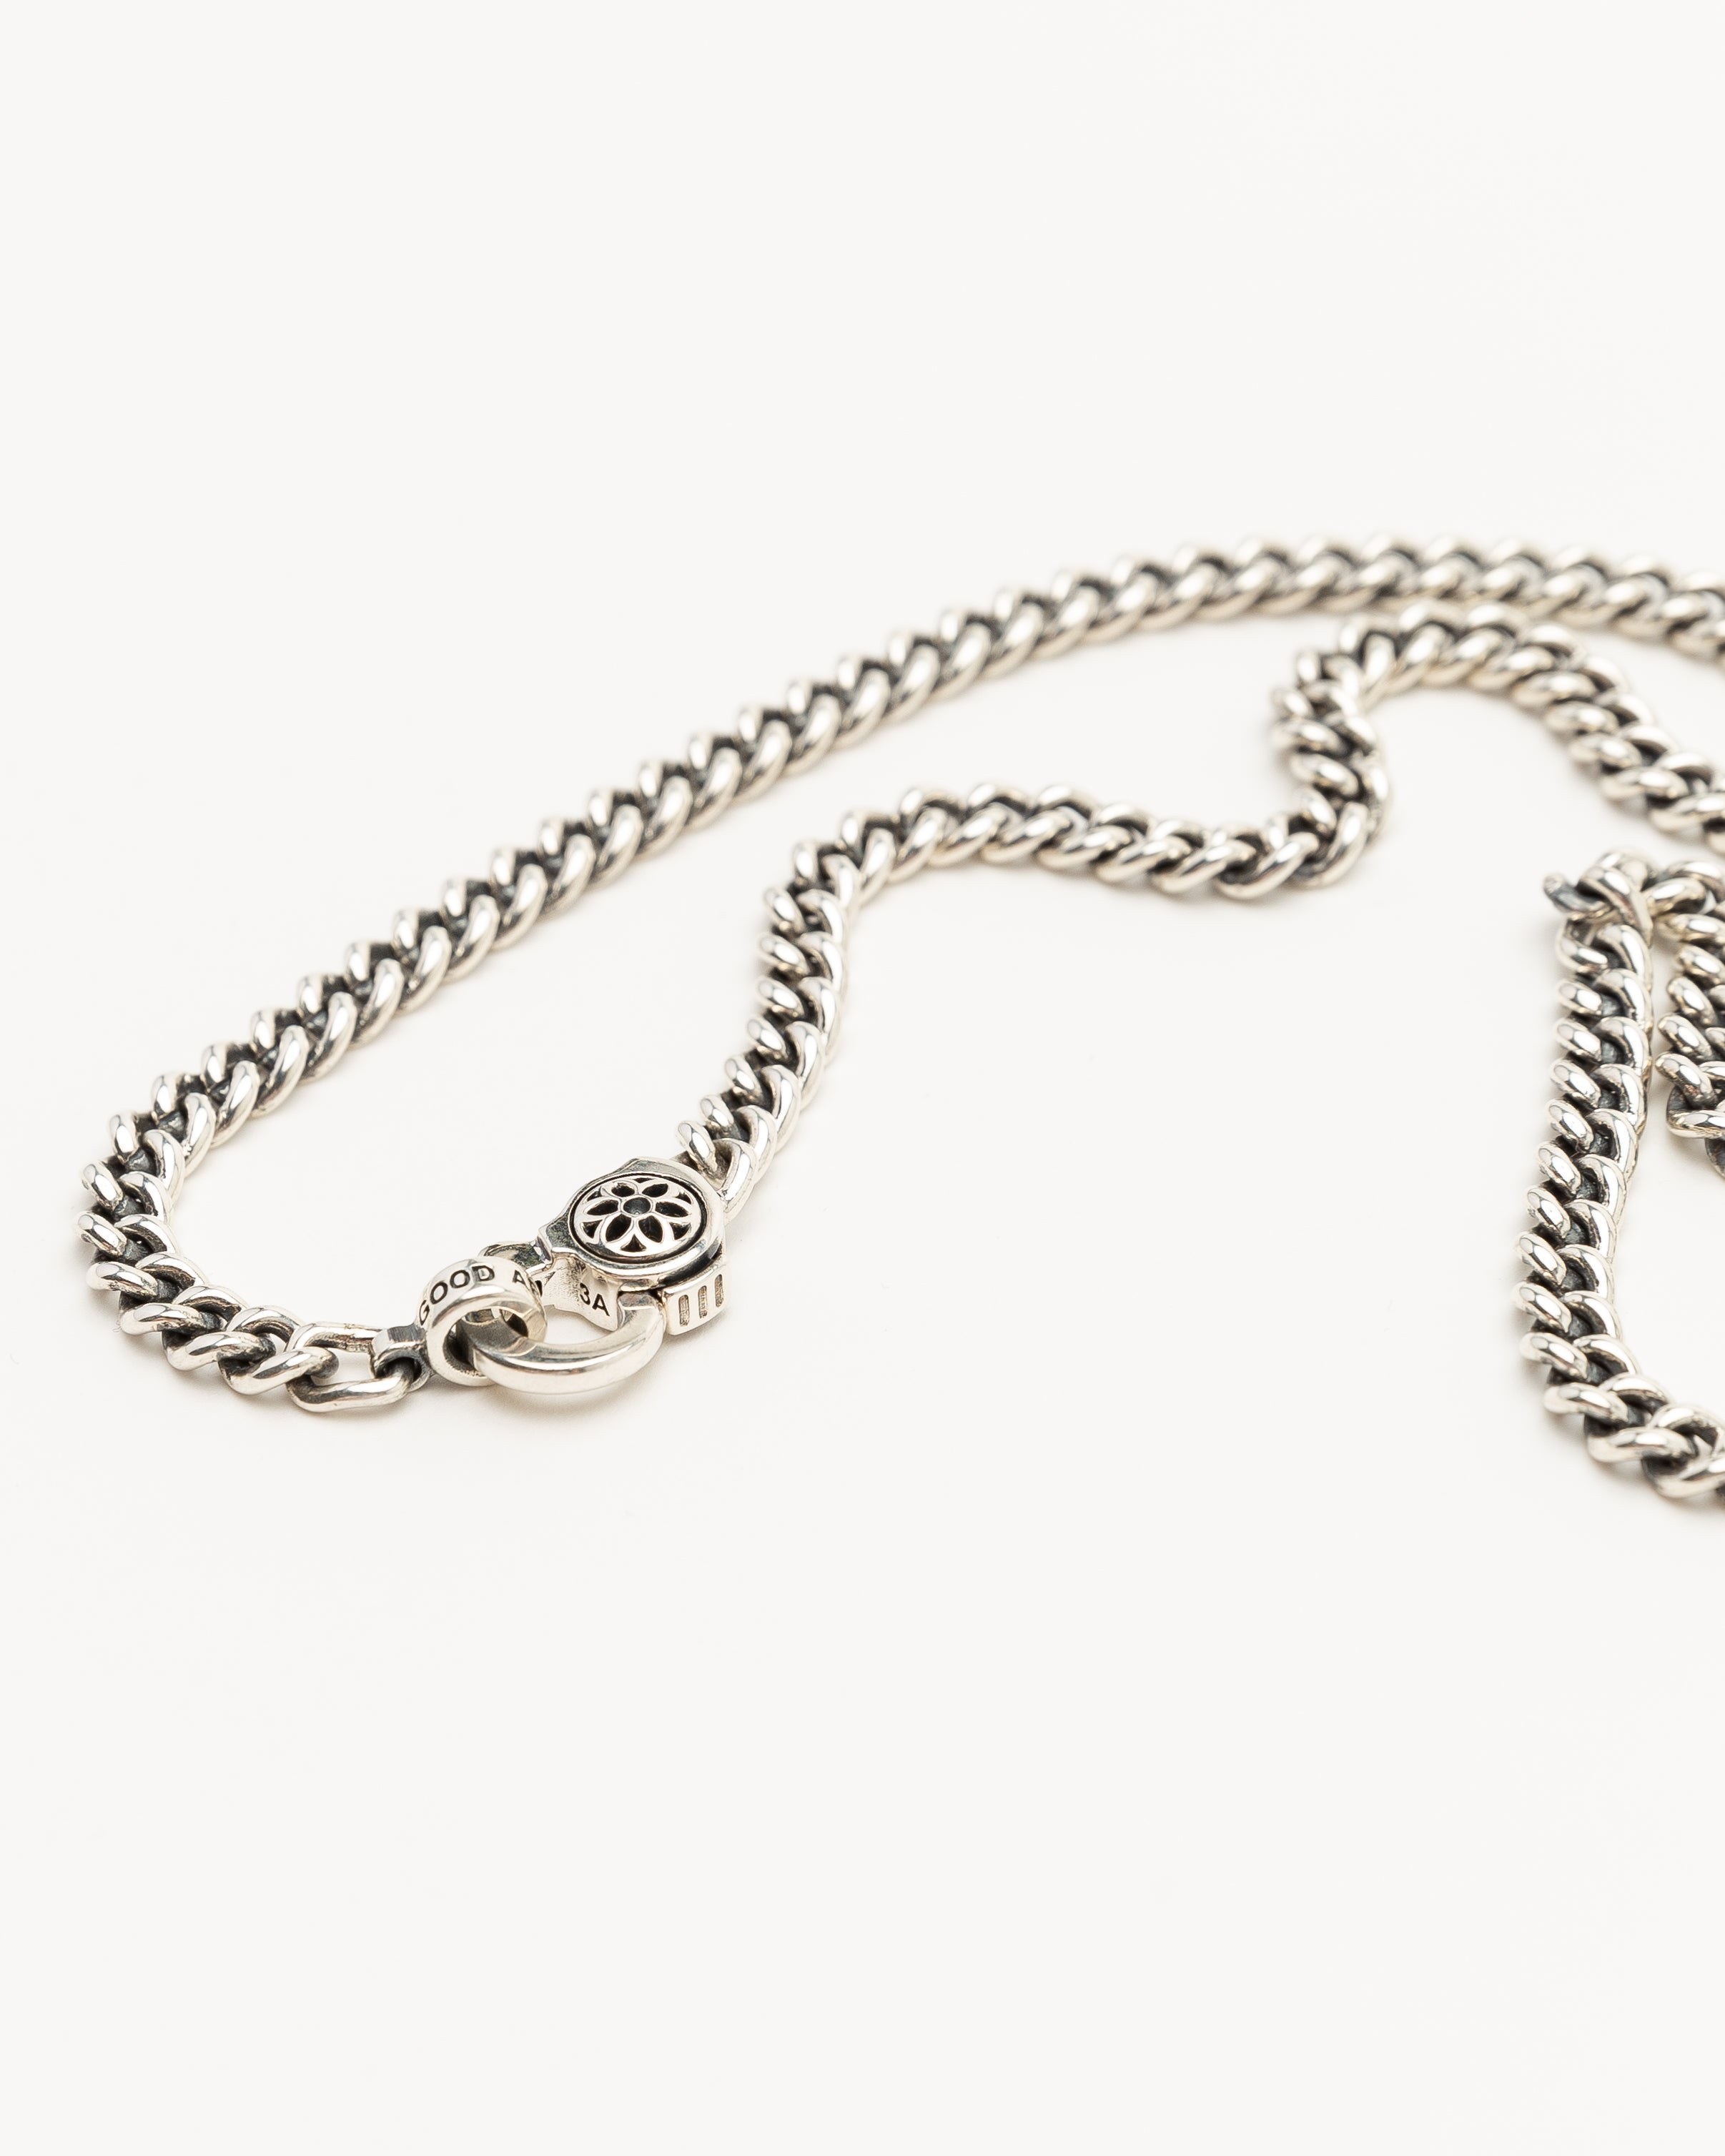 Curb Chain Necklace, #3, Sterling